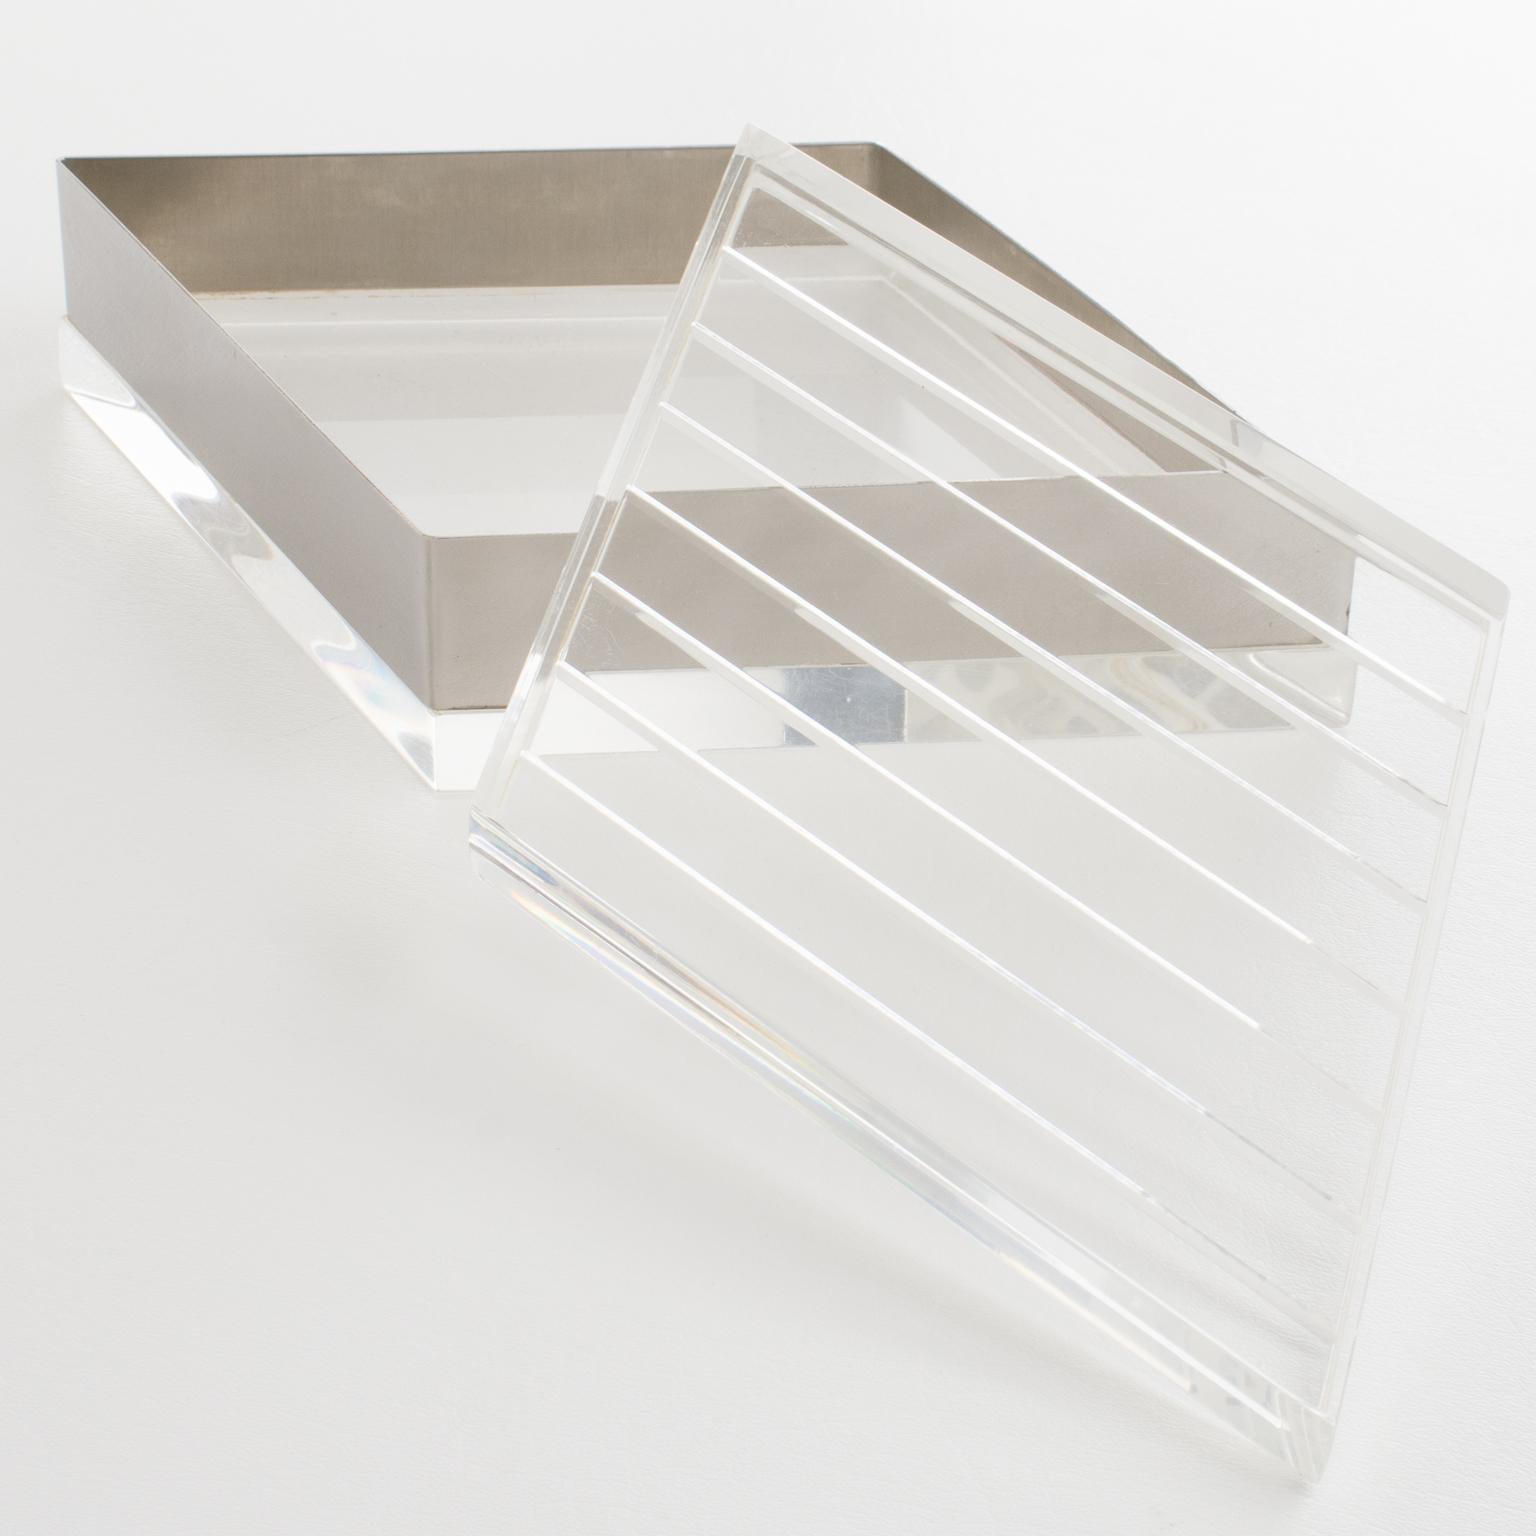 Modernist Geometric Lucite and Chrome Metal Decorative Box, France 1970s In Excellent Condition For Sale In Atlanta, GA